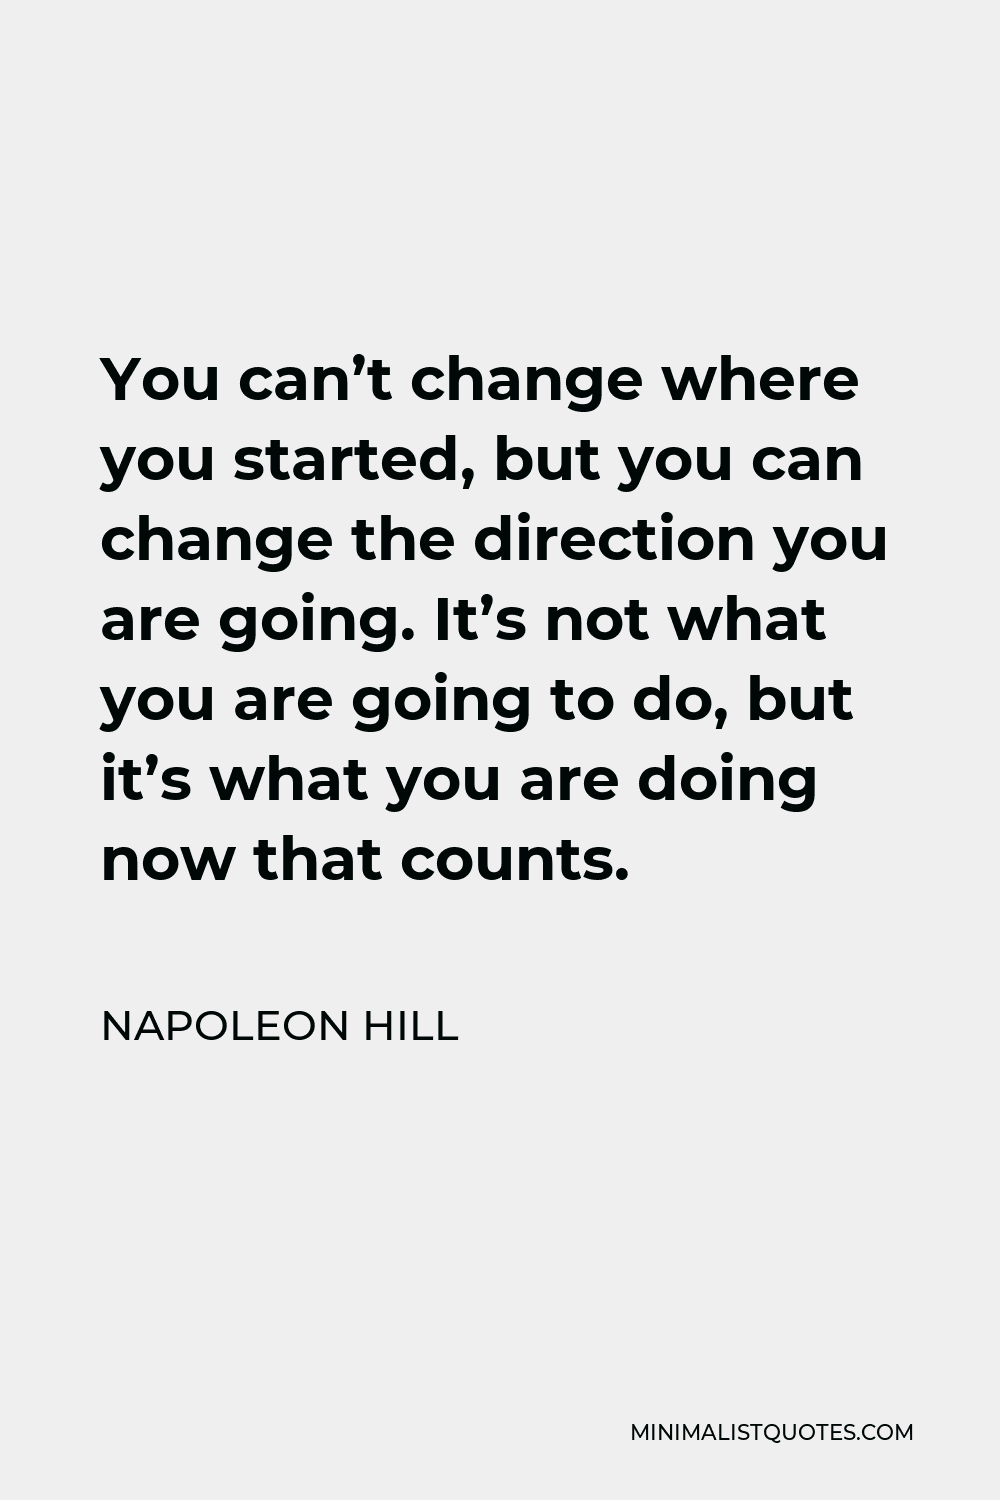 Napoleon Hill Quote - You can’t change where you started, but you can change the direction you are going. It’s not what you are going to do, but it’s what you are doing now that counts.